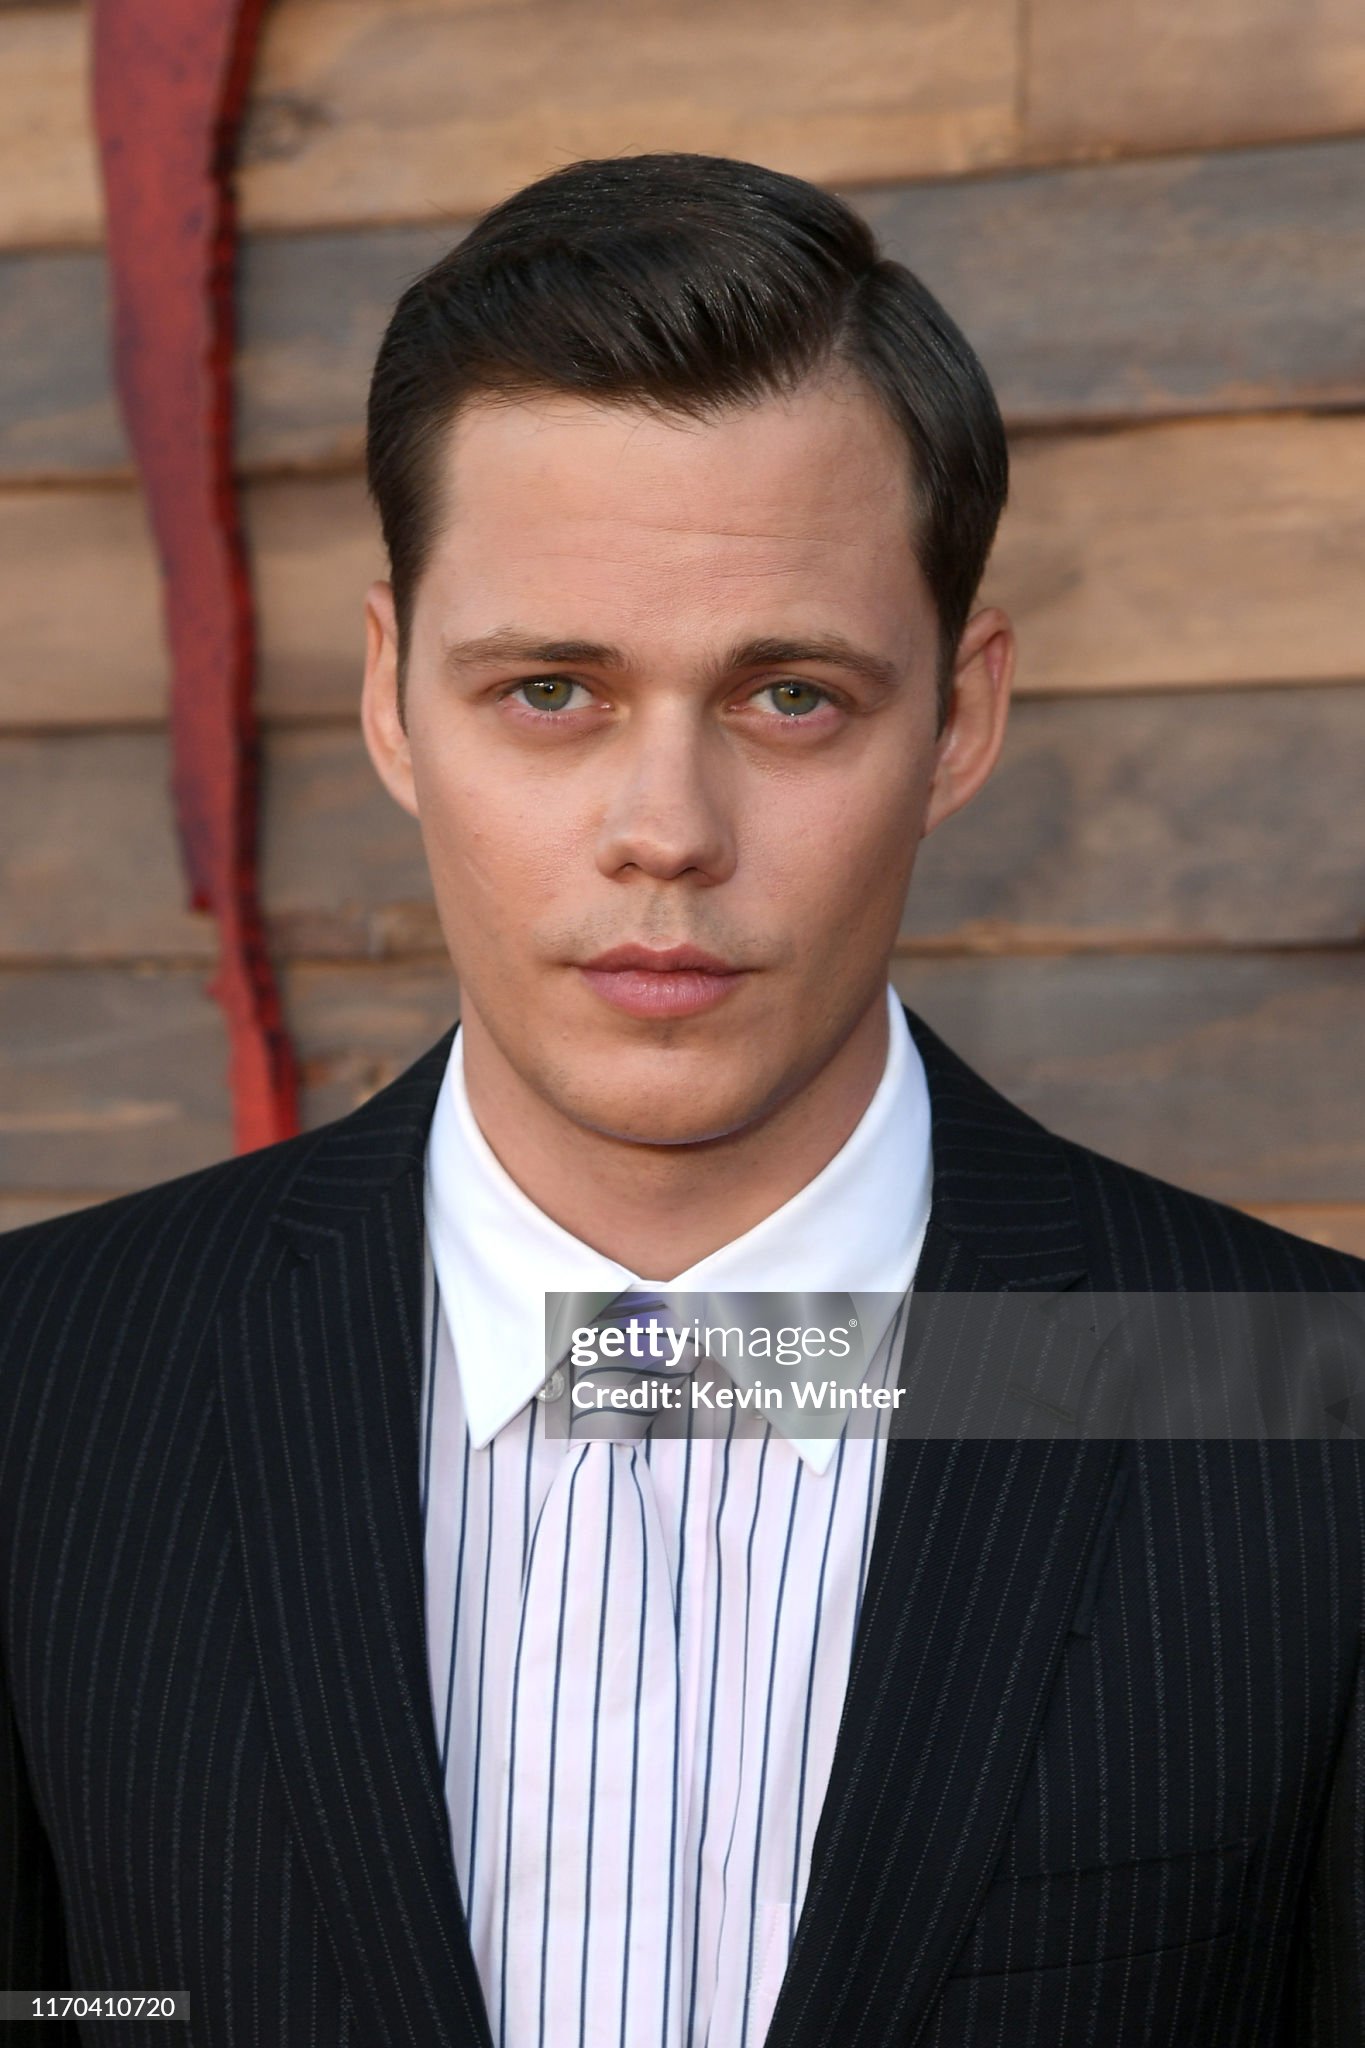 ¿Cuánto mide Bill Skarsgard? - Altura - Real height Westwood-california-bill-skarsg%C3%A5rd-attends-the-premiere-of-warner-bros-pictures-it-chapter-two